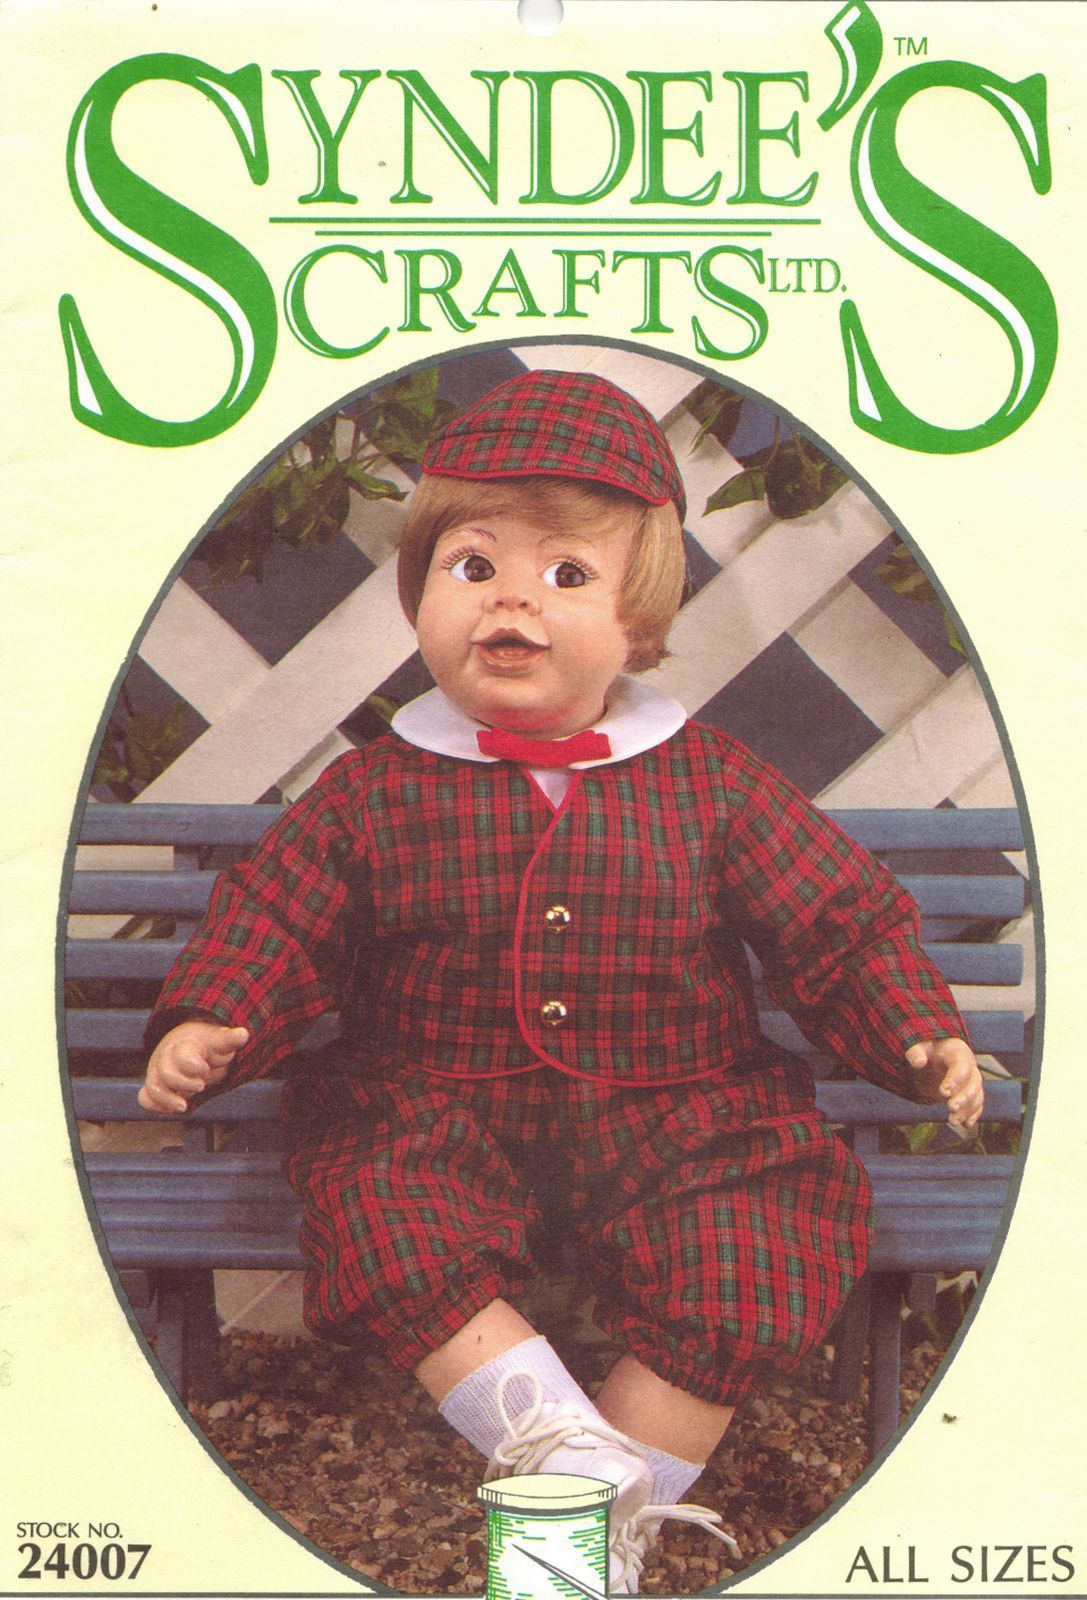 Syndee's Crafts 10 16 21" Eton Charlee Doll Clothes Shirt Jacket Sew Patterns - $12.99